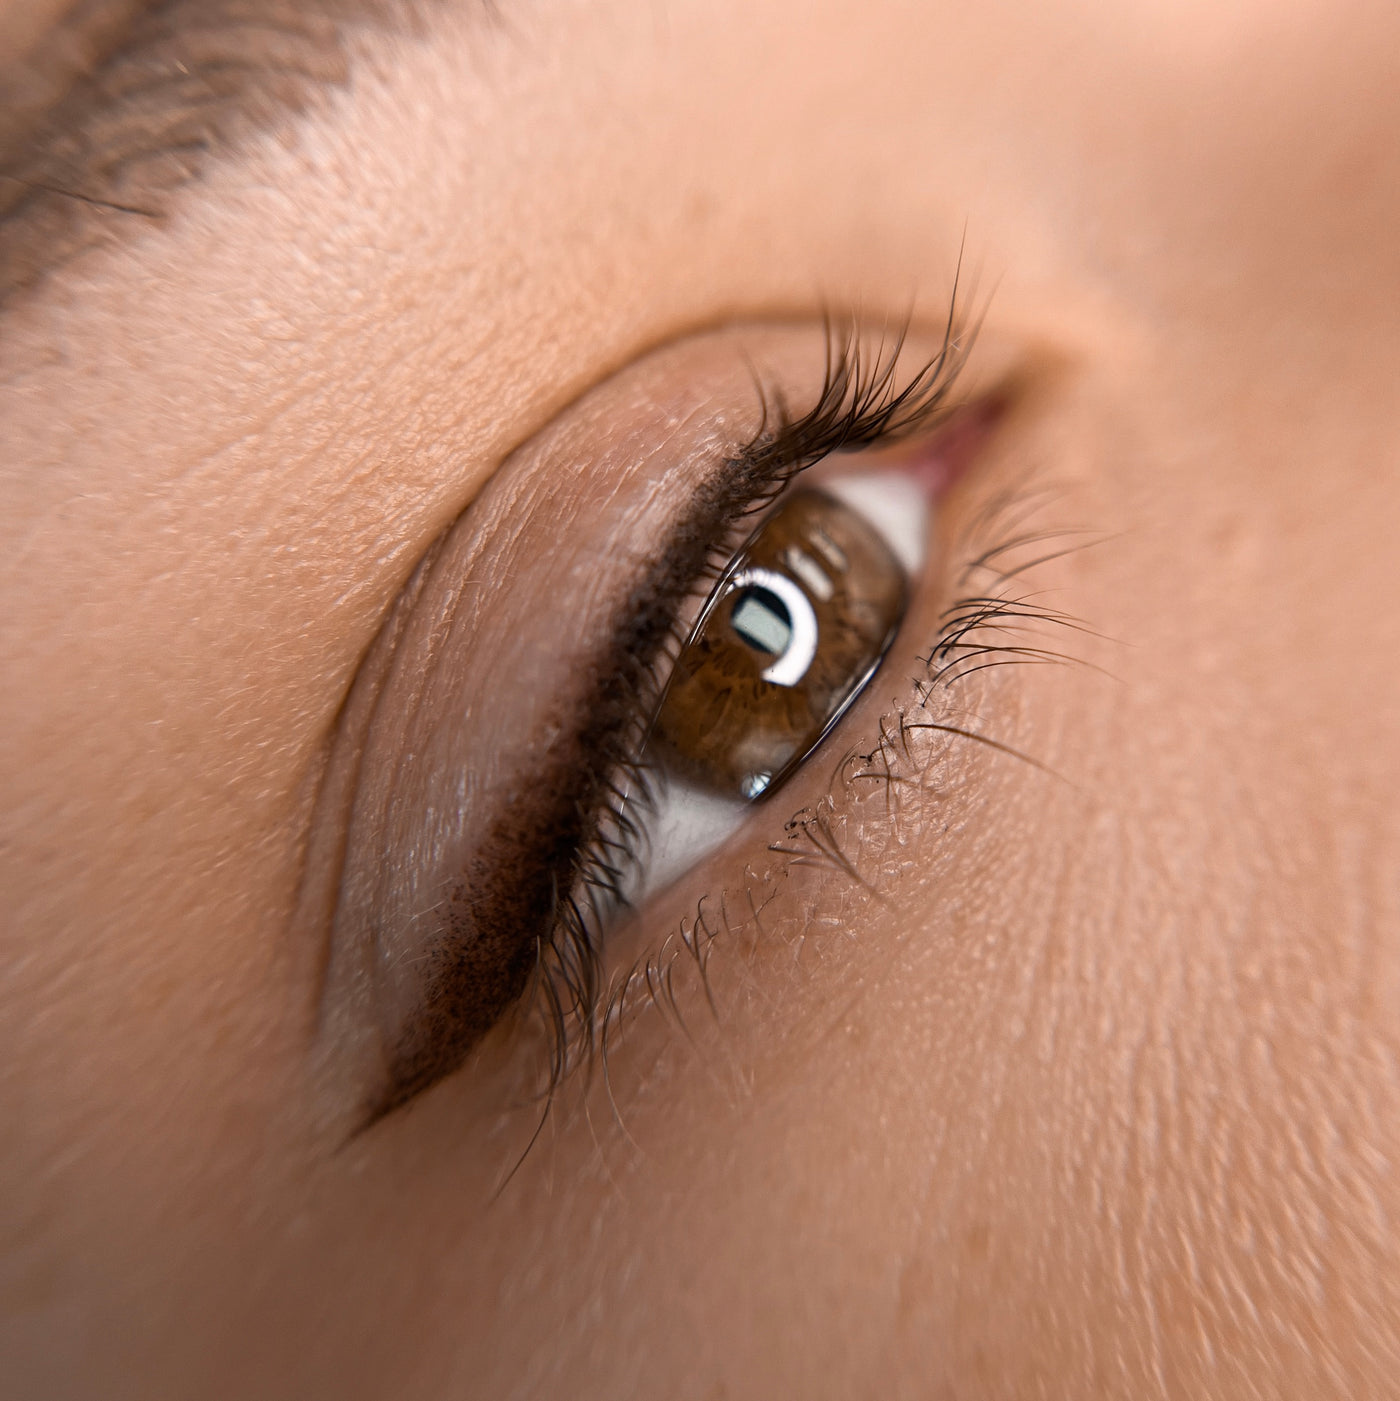 Permanent Eyeliner Training (IN-PERSON) - Light Touch Permanent Makeup Studio & Trainings